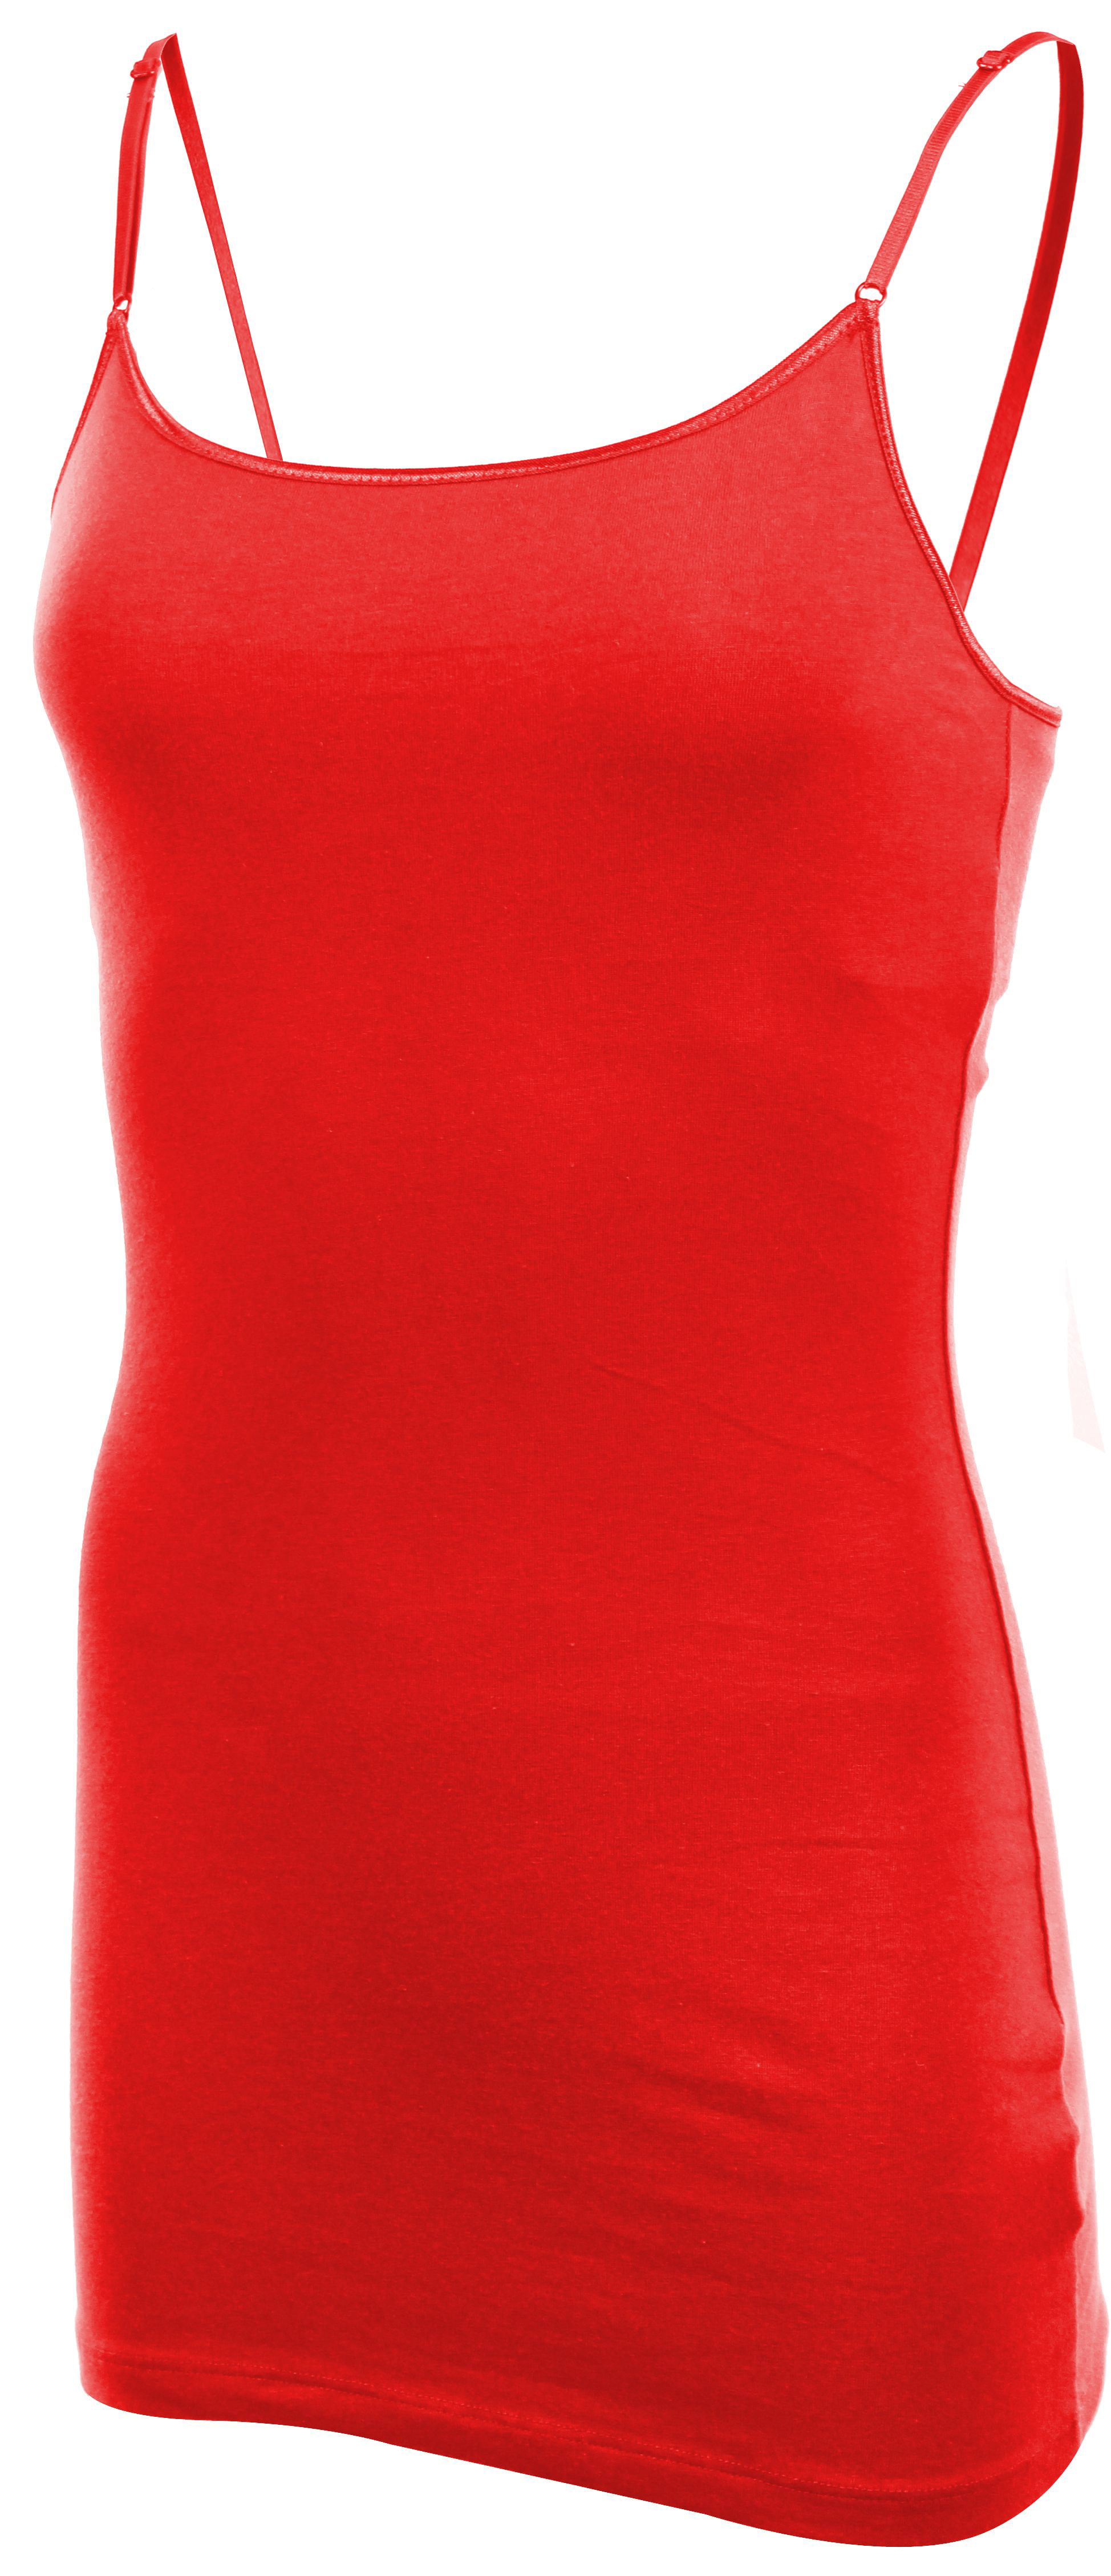 Enimay - Women's Base Layer Tank Top Camisole With Adjustable Straps ...